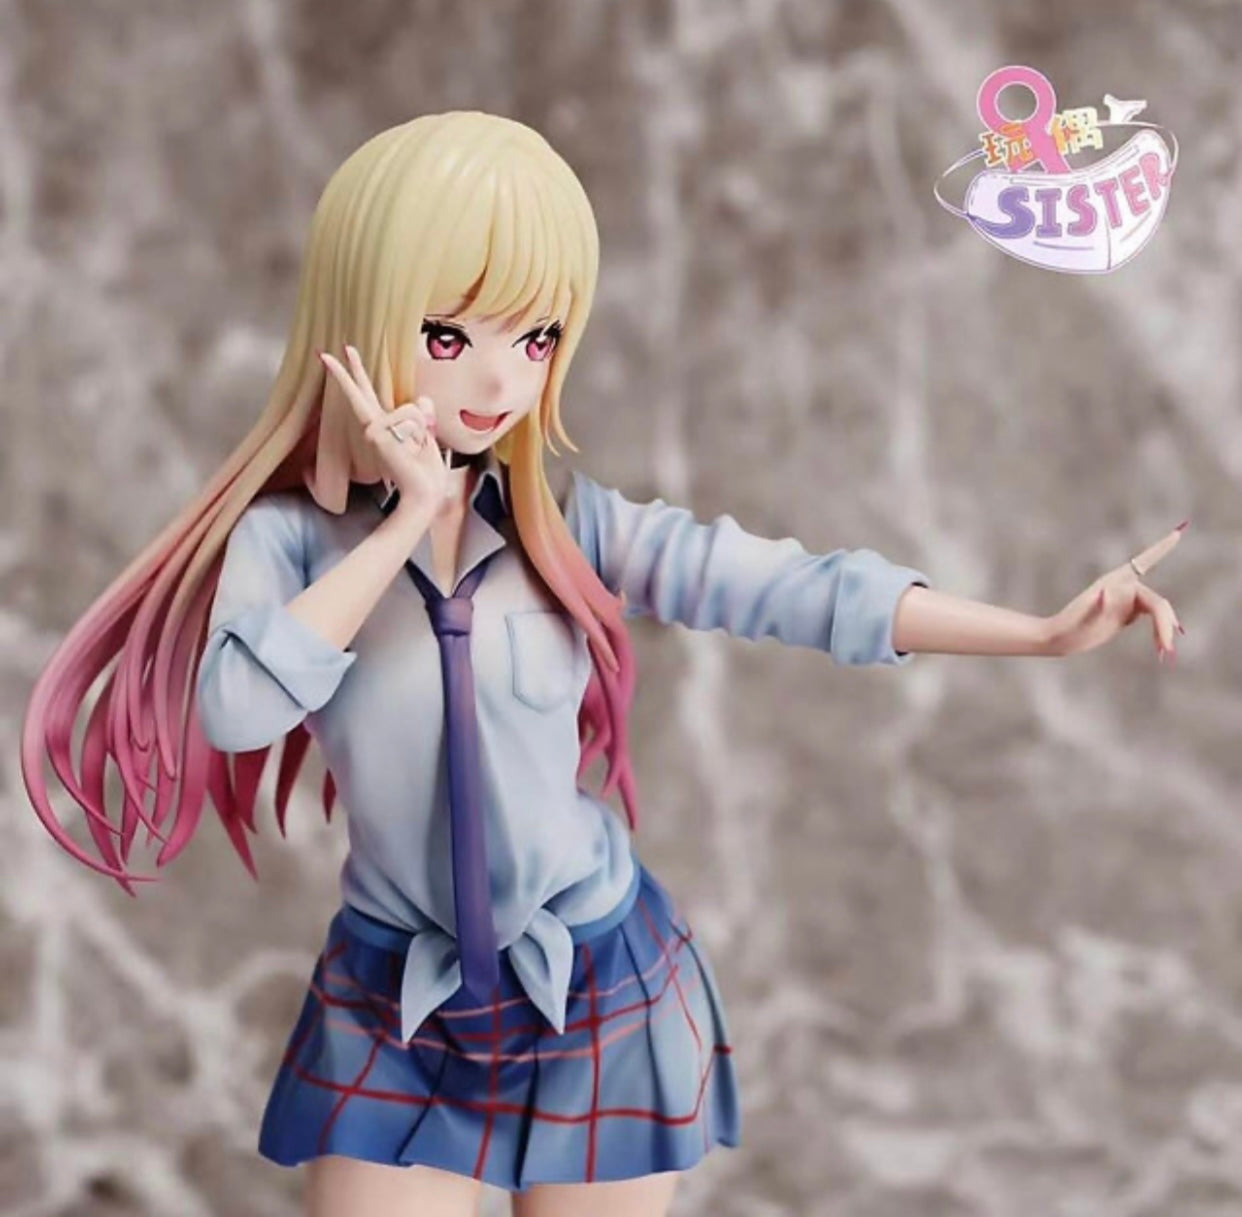 Sister Studio - Marin Kitagawa Normal Version Version (Price Does Not Include Shipping)